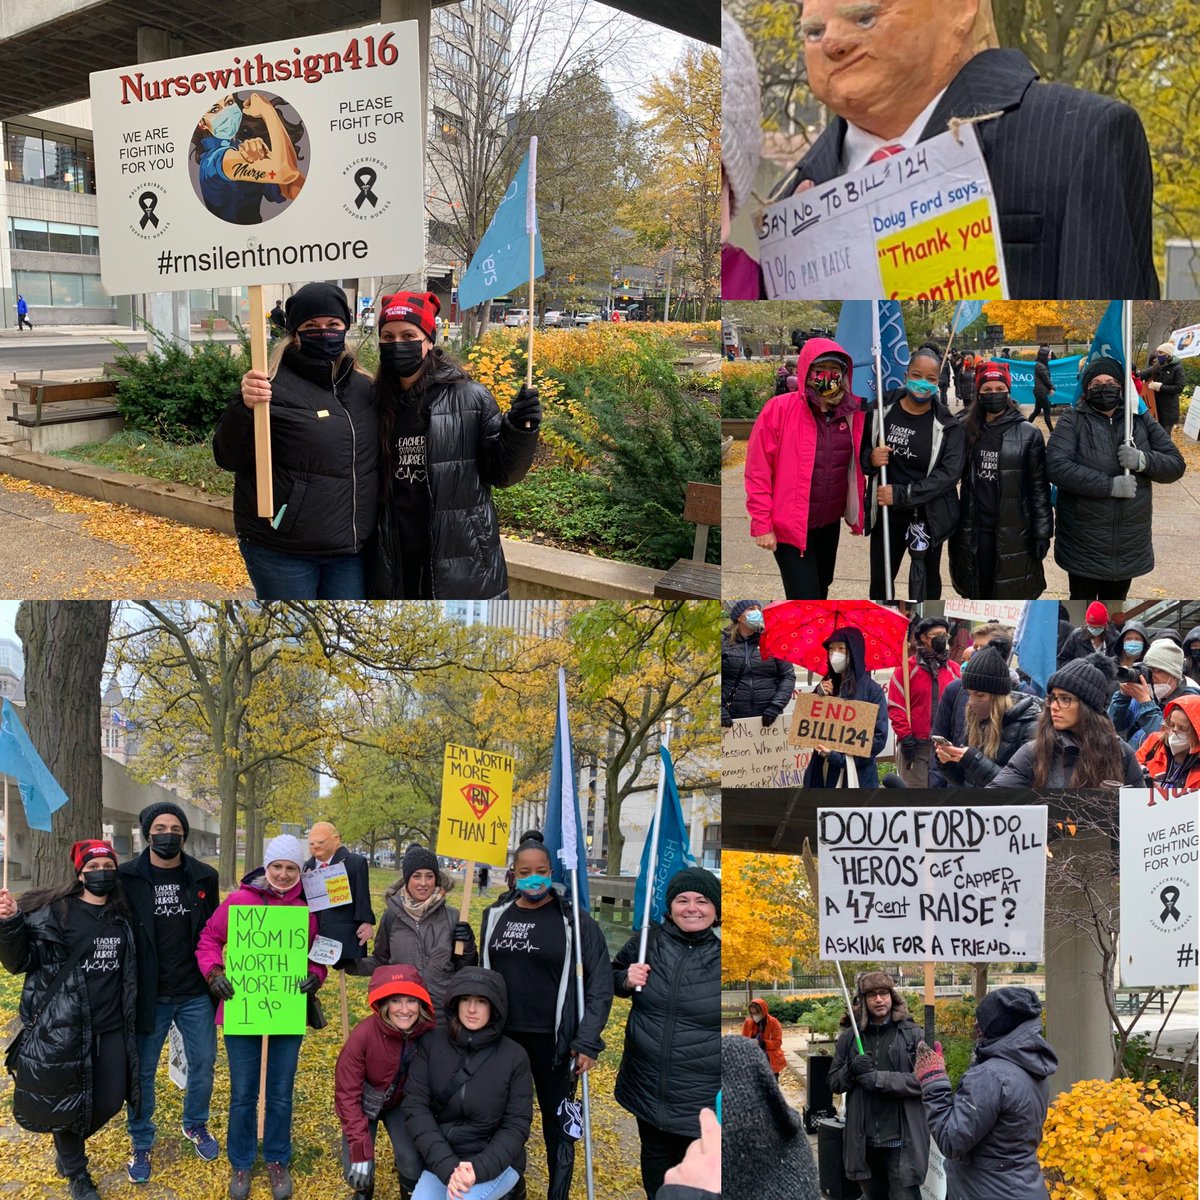 The rain did not stop us from supporting our nurses. Ontario is experiencing a severe nursing shortage. We stand in solidarity to #repealbill124 ! #fairwages #safeworkloads @fordnation @NurseWithSign @ONA